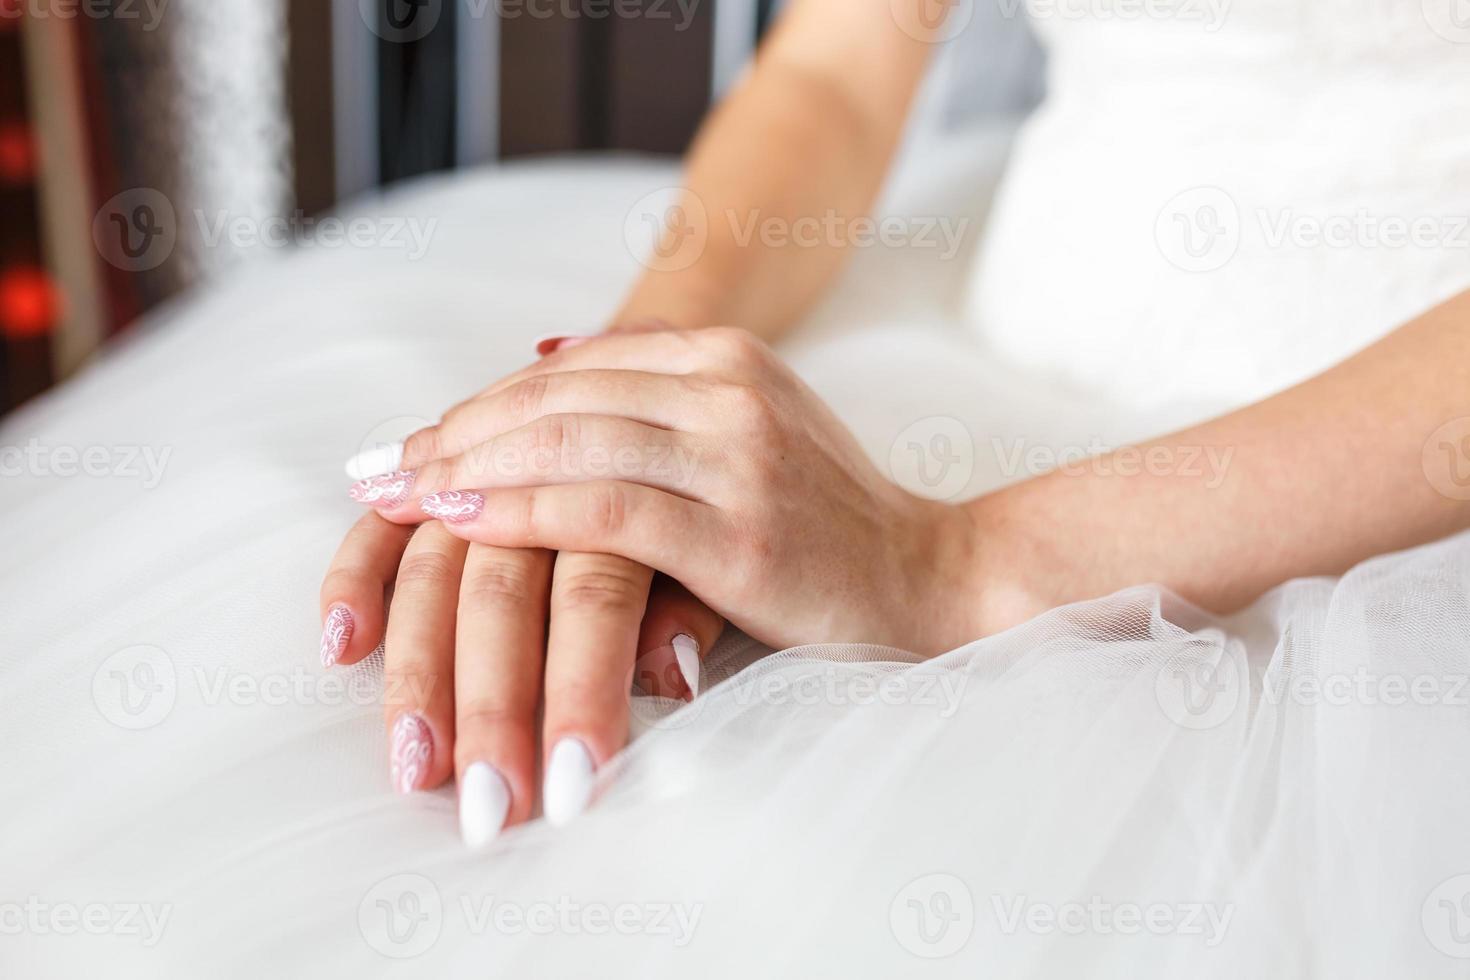 women's hands folded on their knees in anticipation of the wedding and ...